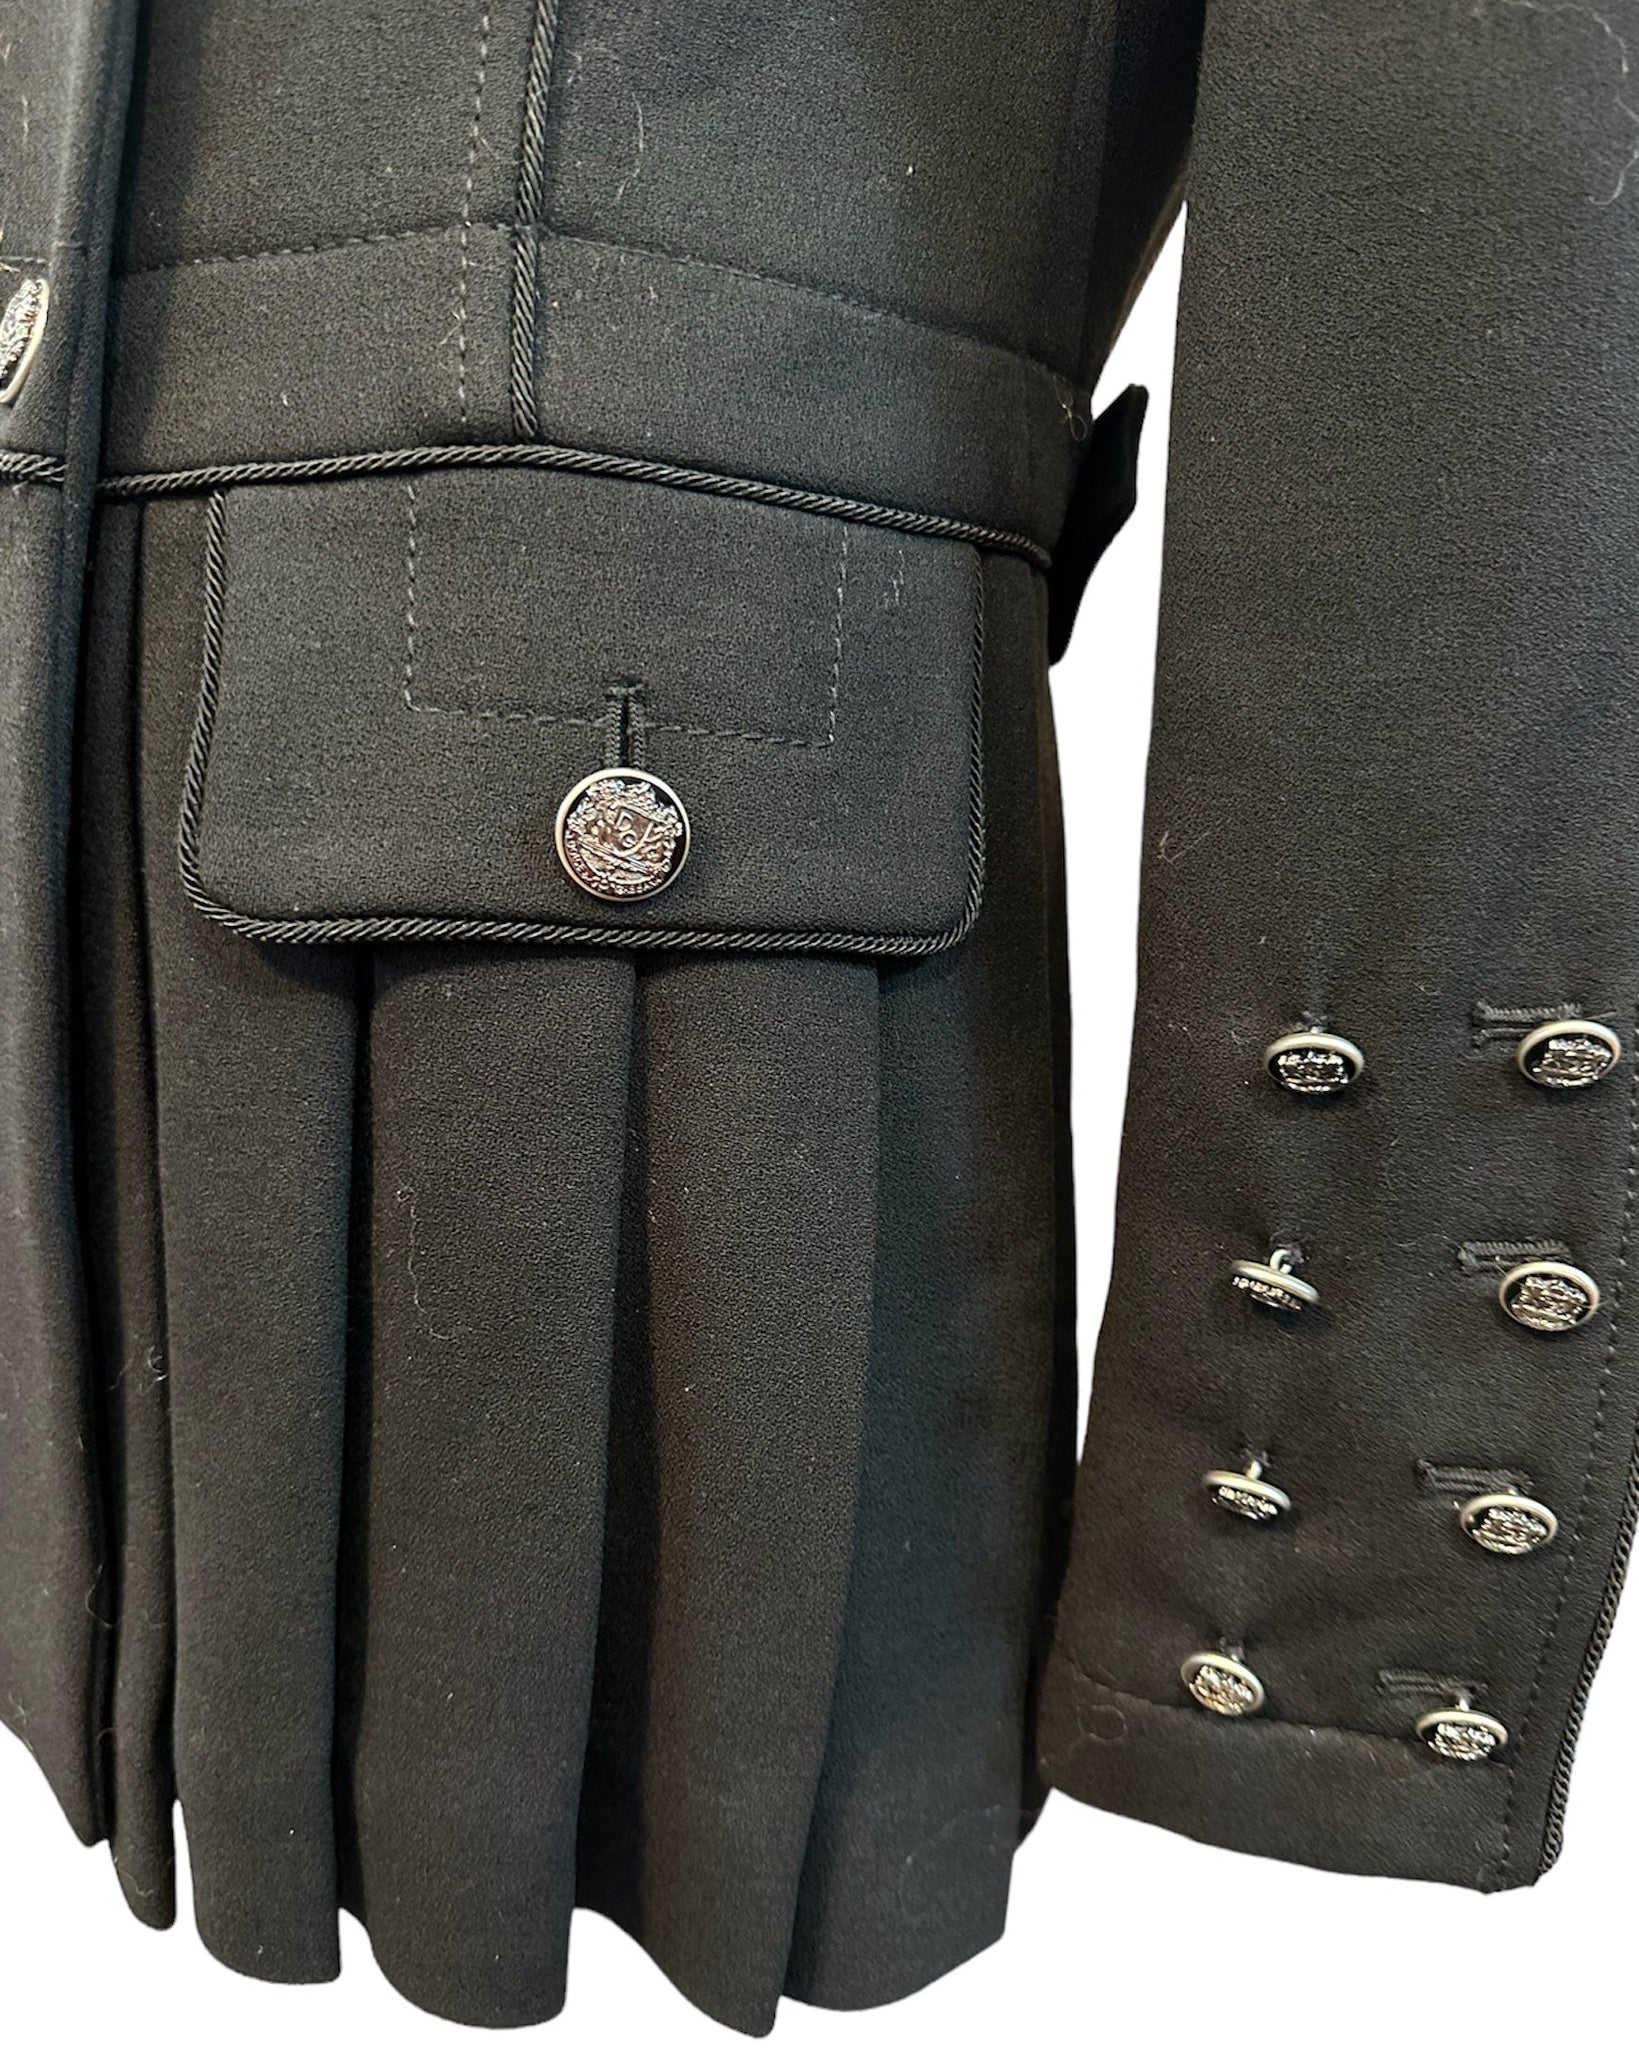 Dolce and Gabbana 2000s Spectacular Black Wool Military Inspired Coat HEM AND CUFF DETAIL 5 of 8